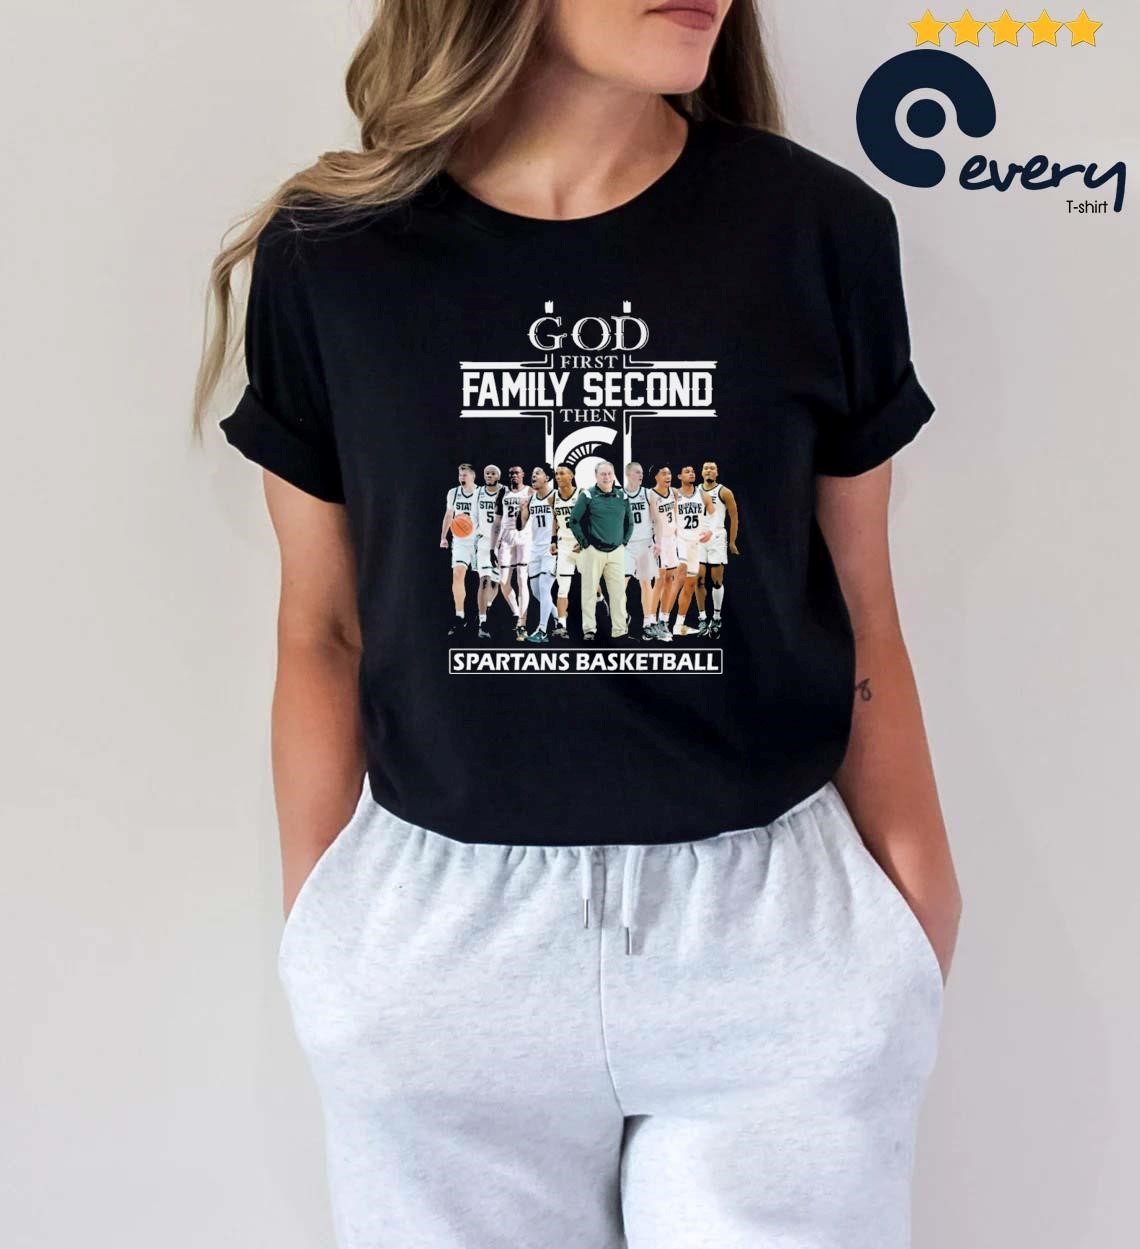 God First Family Second The Michigan State Spartans Basketball shirt